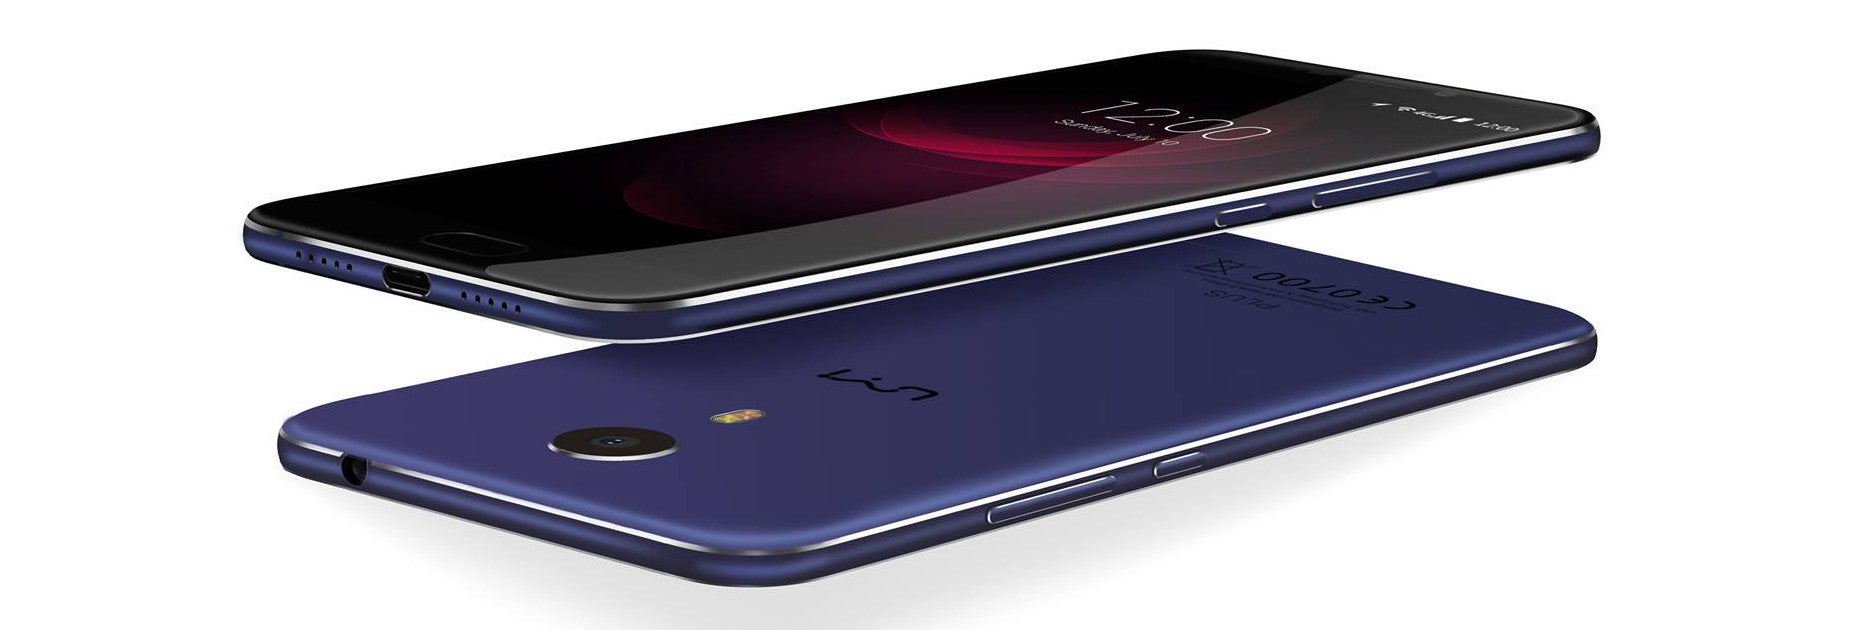 UMi Plus Extreme Edition coming soon with 6GB RAM, Helio P20 CPU, Android 7.0 Nougat